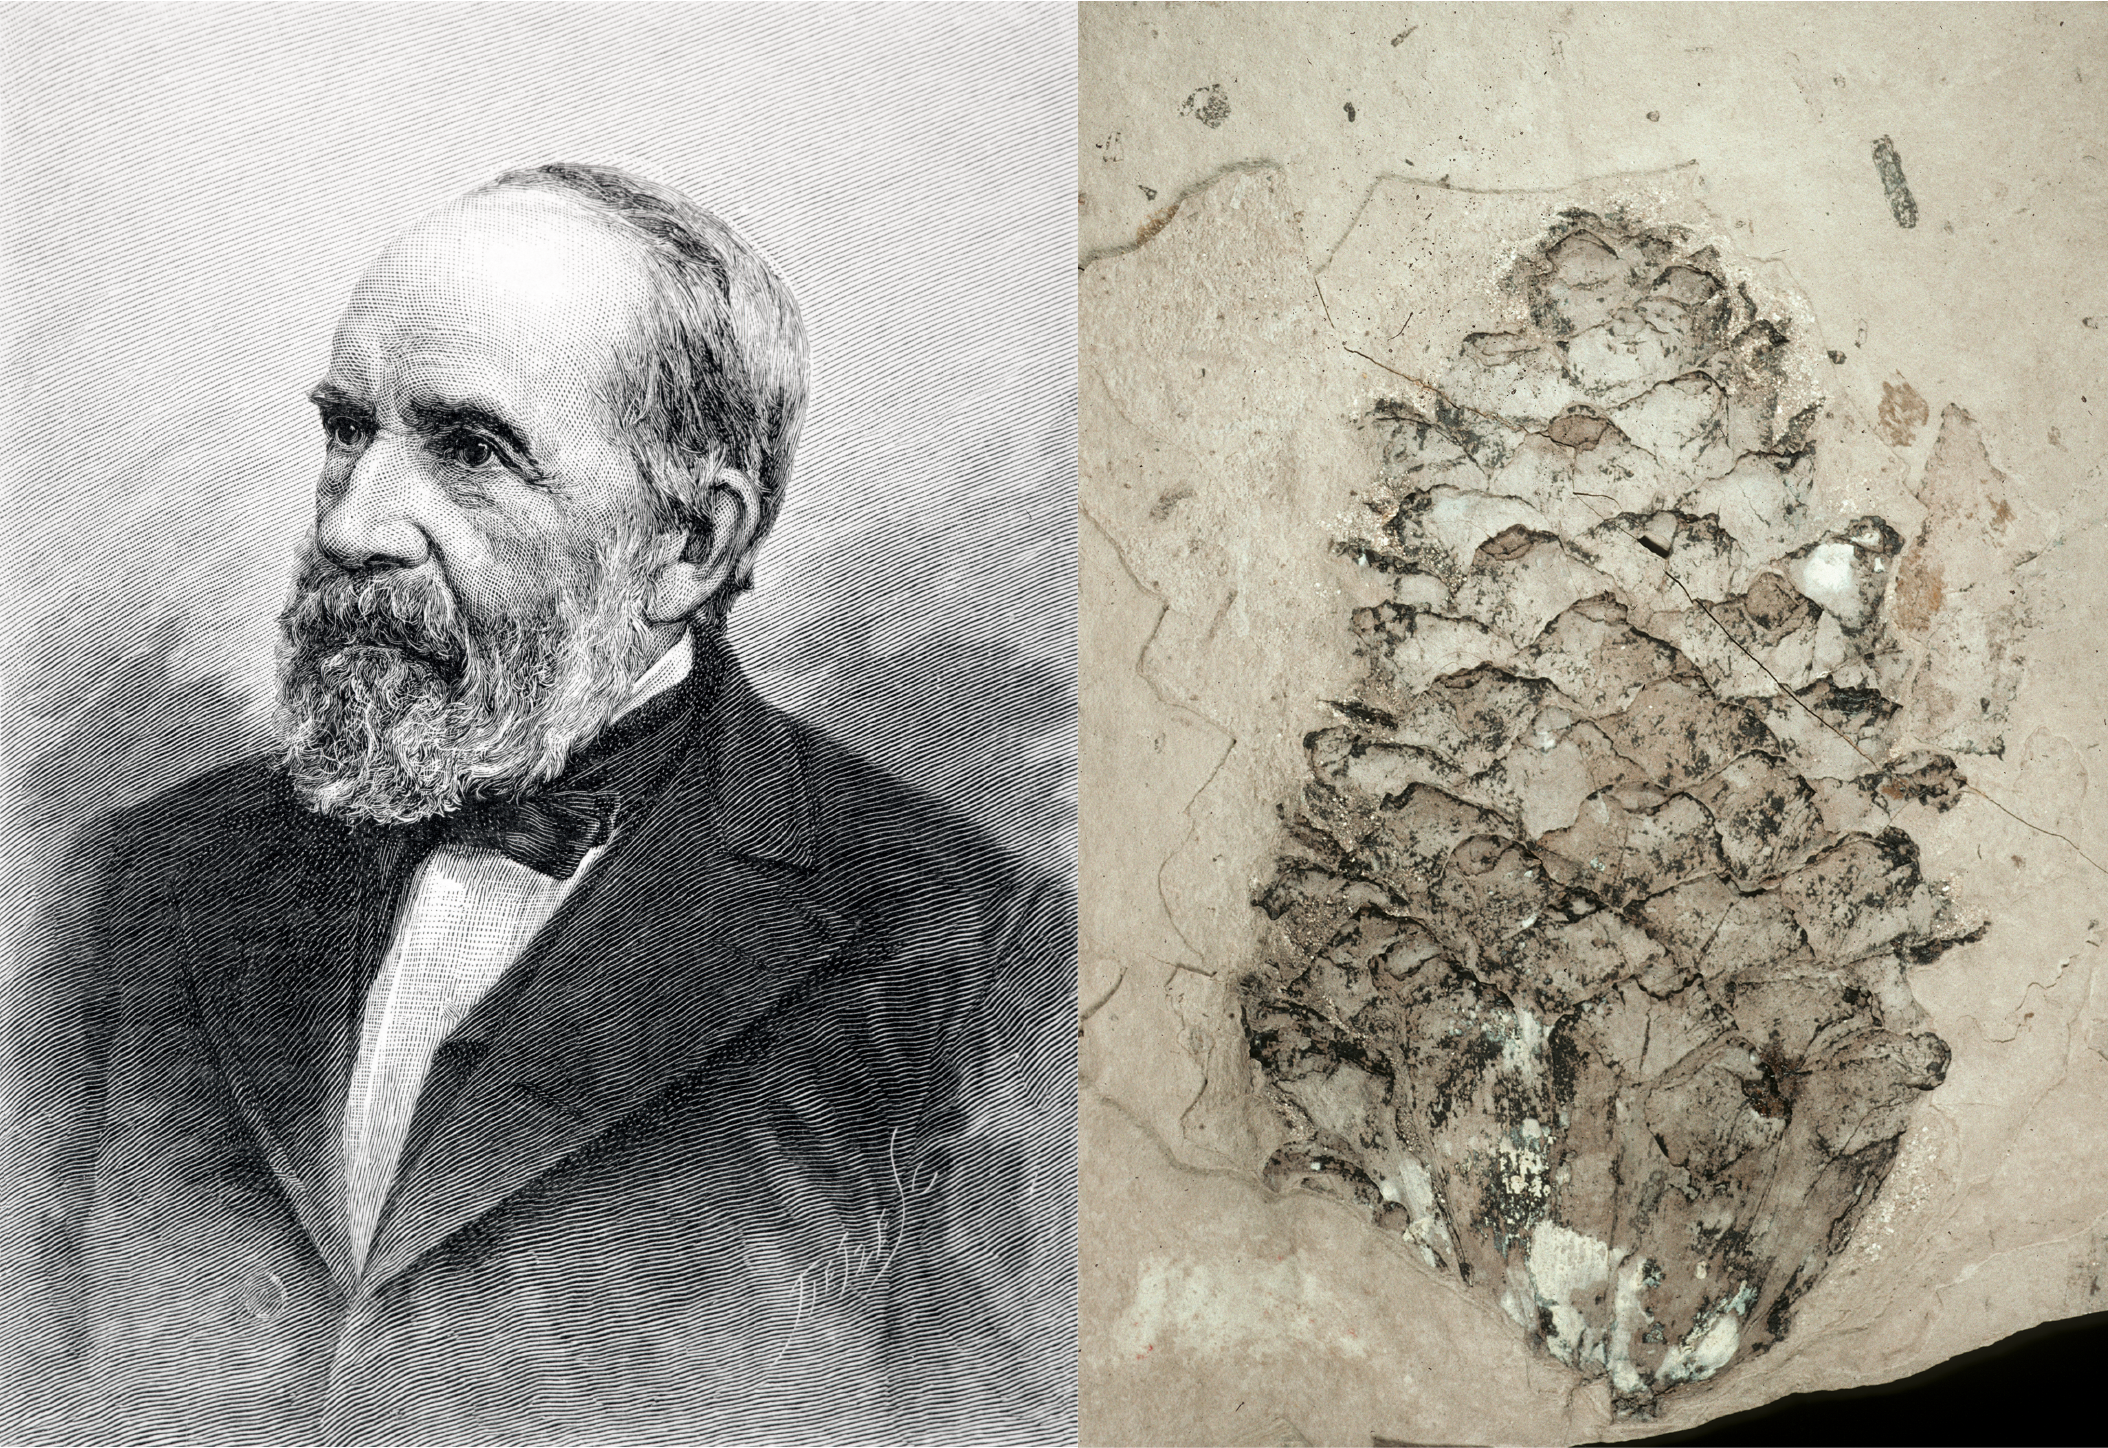 An image of a bearded man on left and a pine cone fossil on right.